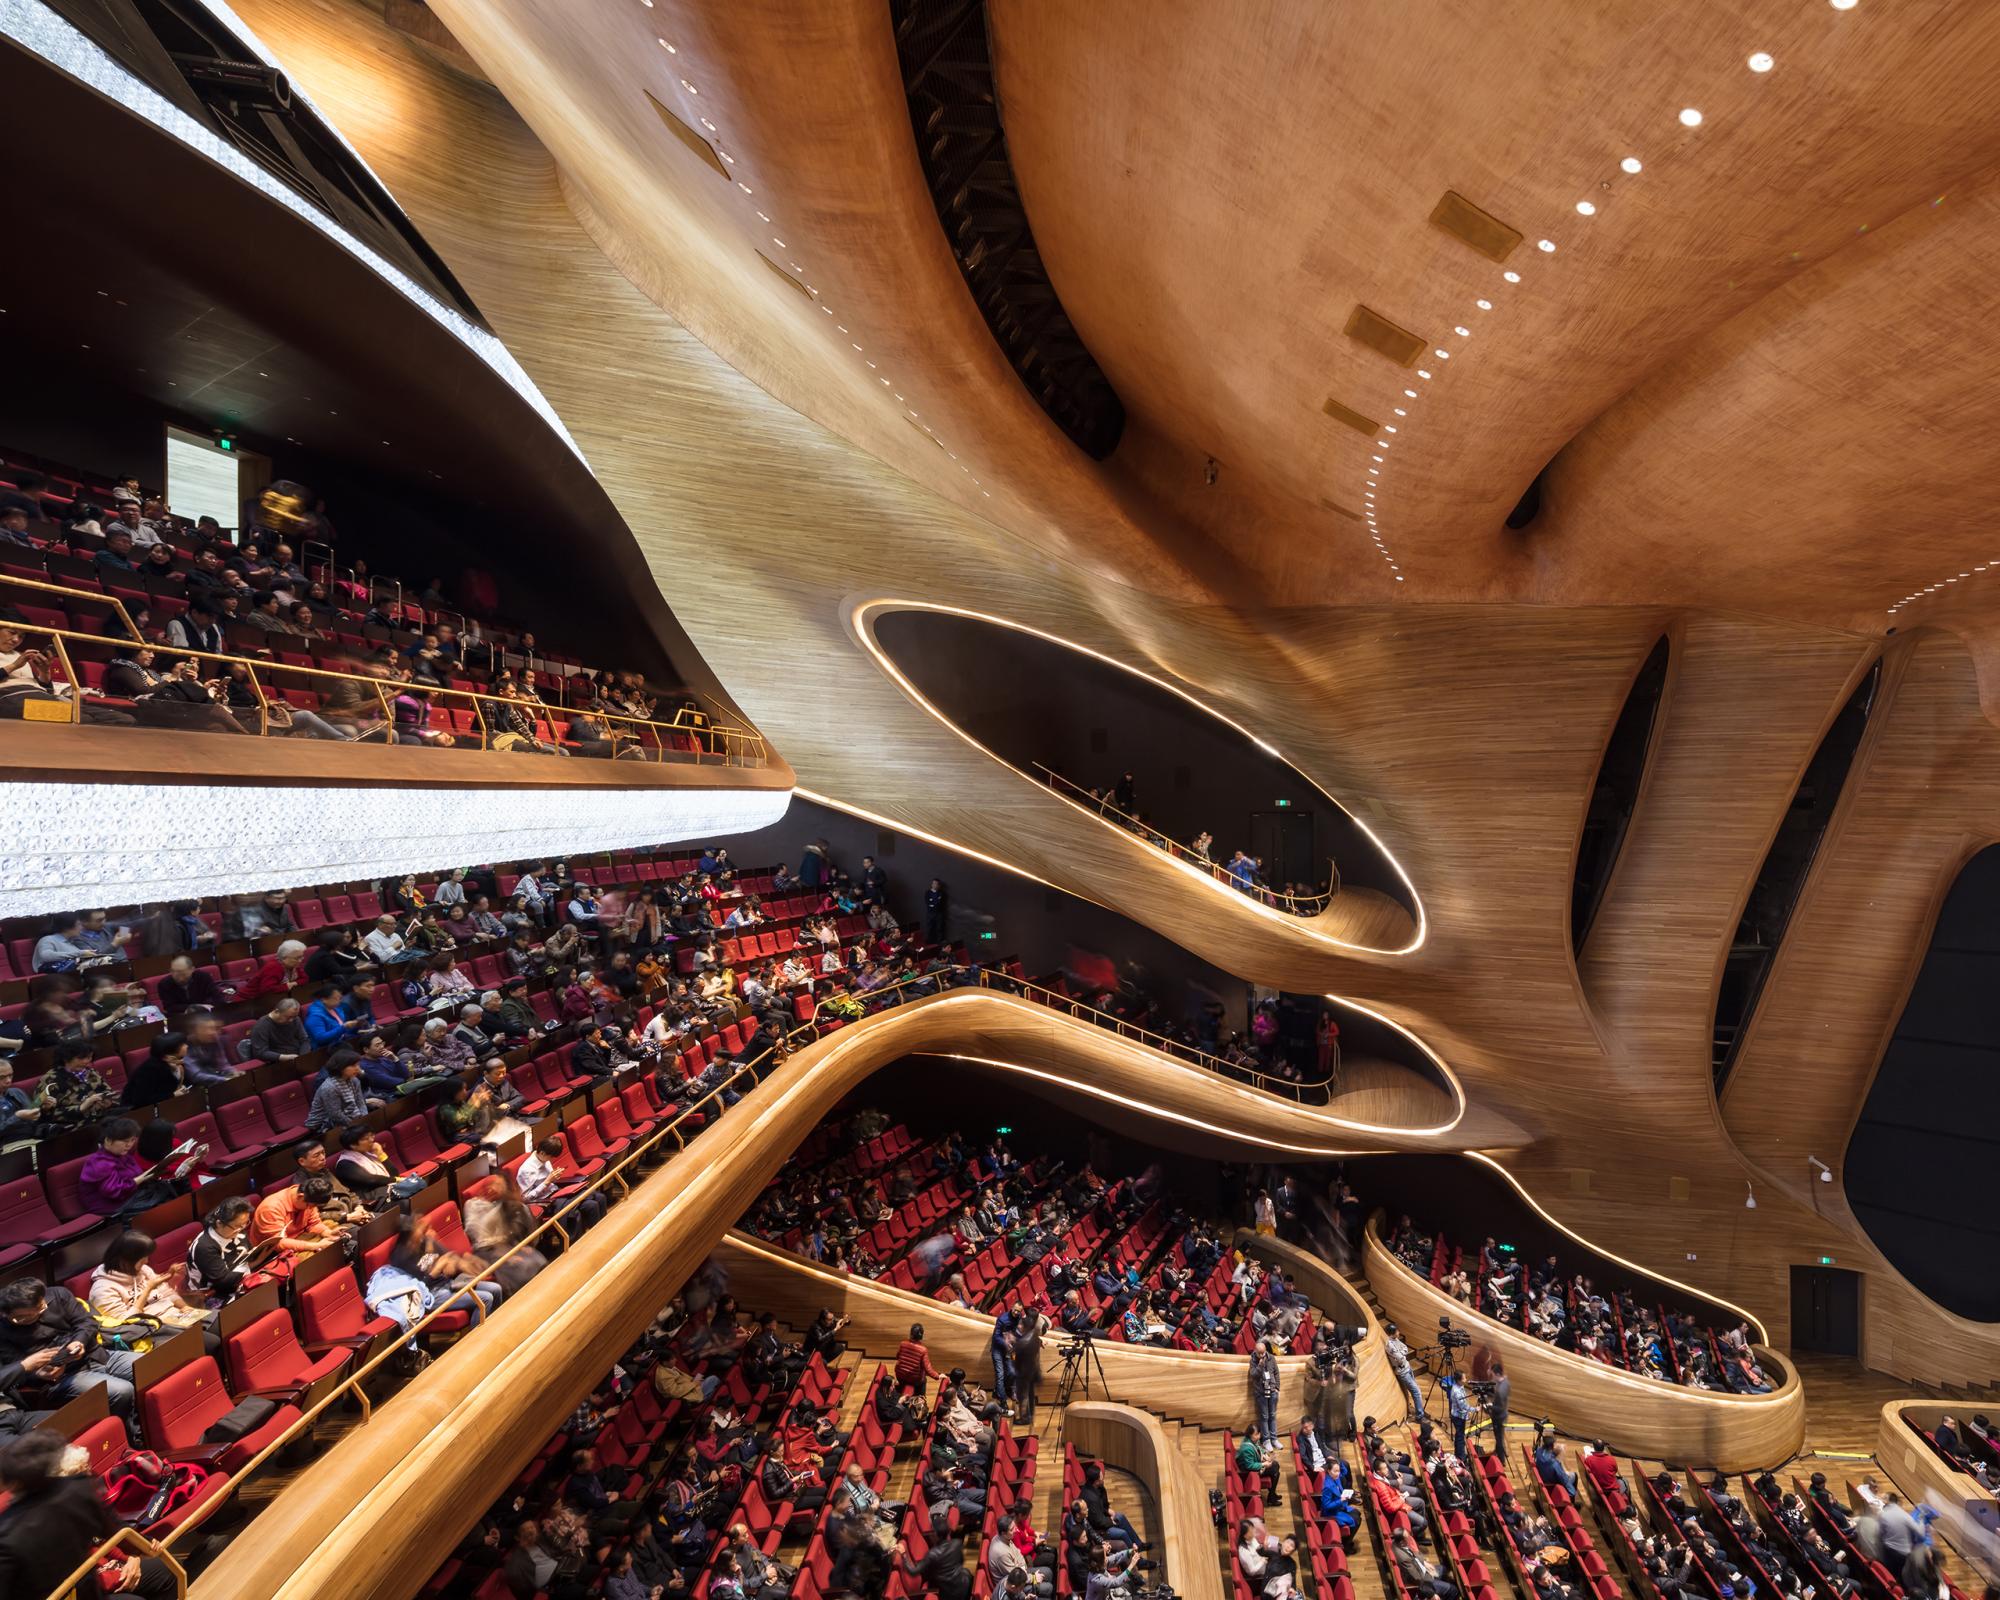 Photograph of Harbin Opera House, designed by MAD Architects and located in Harbin, China